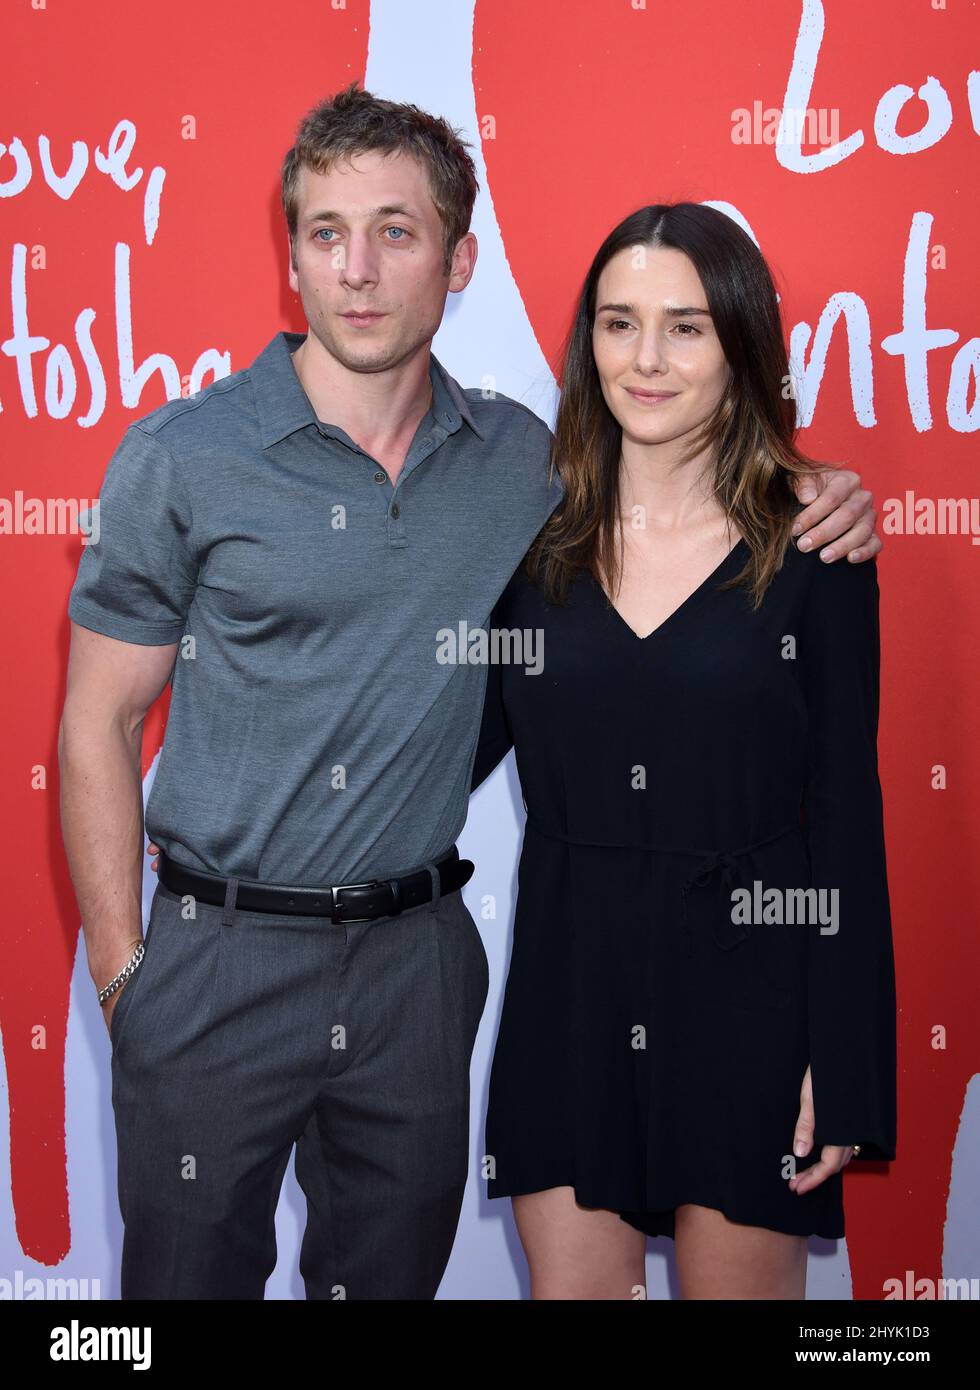 Jeremy Allen White and Addison Timlin attending the premiere of Love, Antosha held at the ArcLight Cinemas in Los Angeles, California Stock Photo